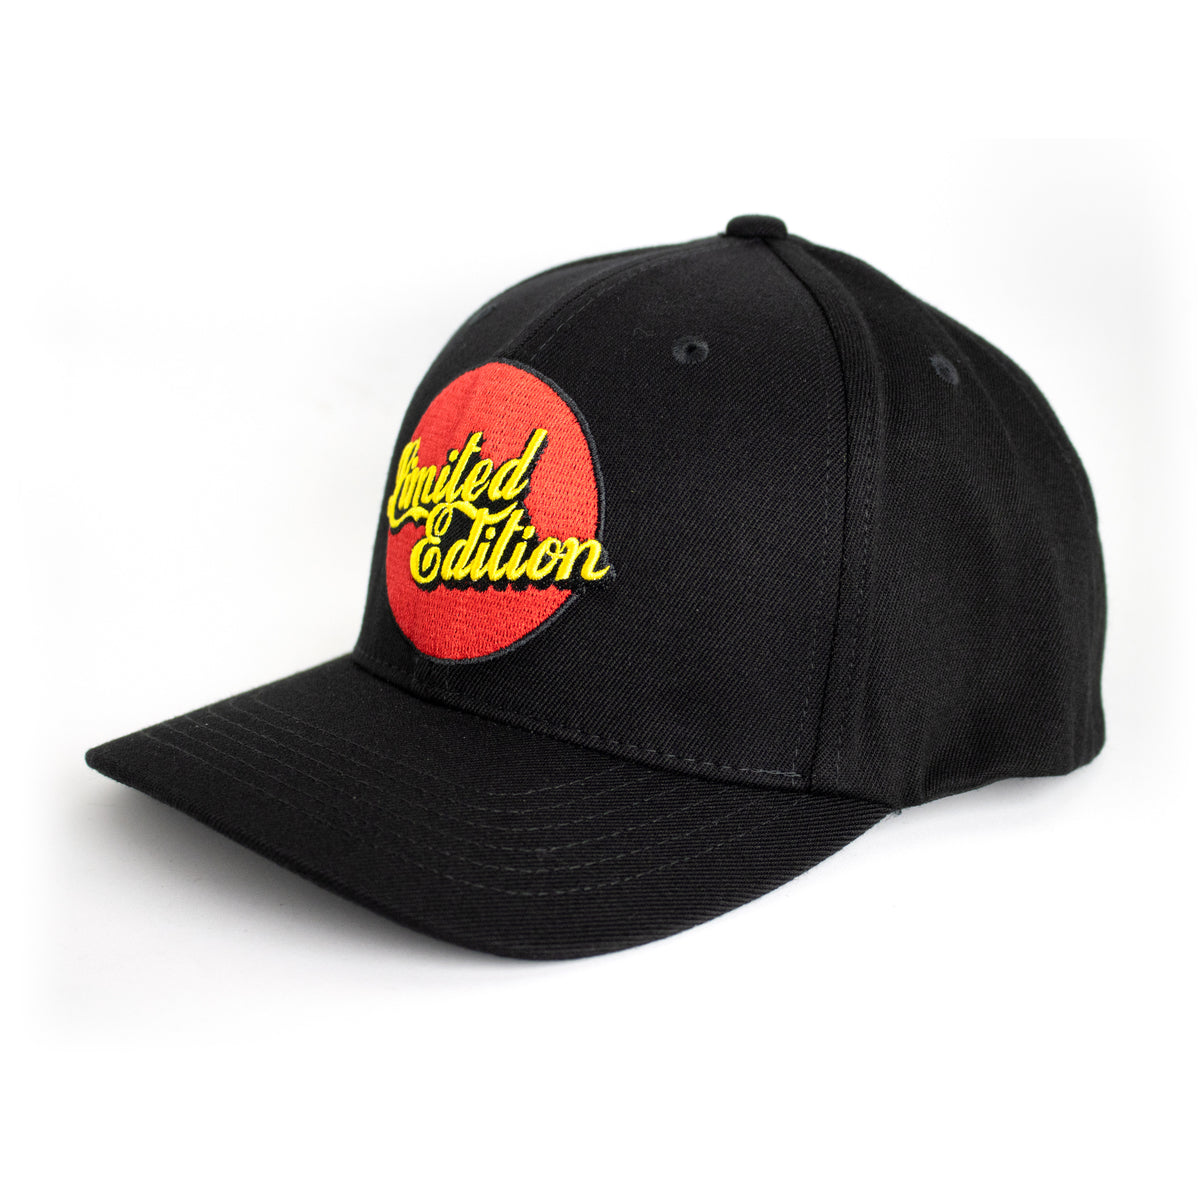 Limited Edition NEW DAWN Black Snap Back Hat - Nomad Bodyboards